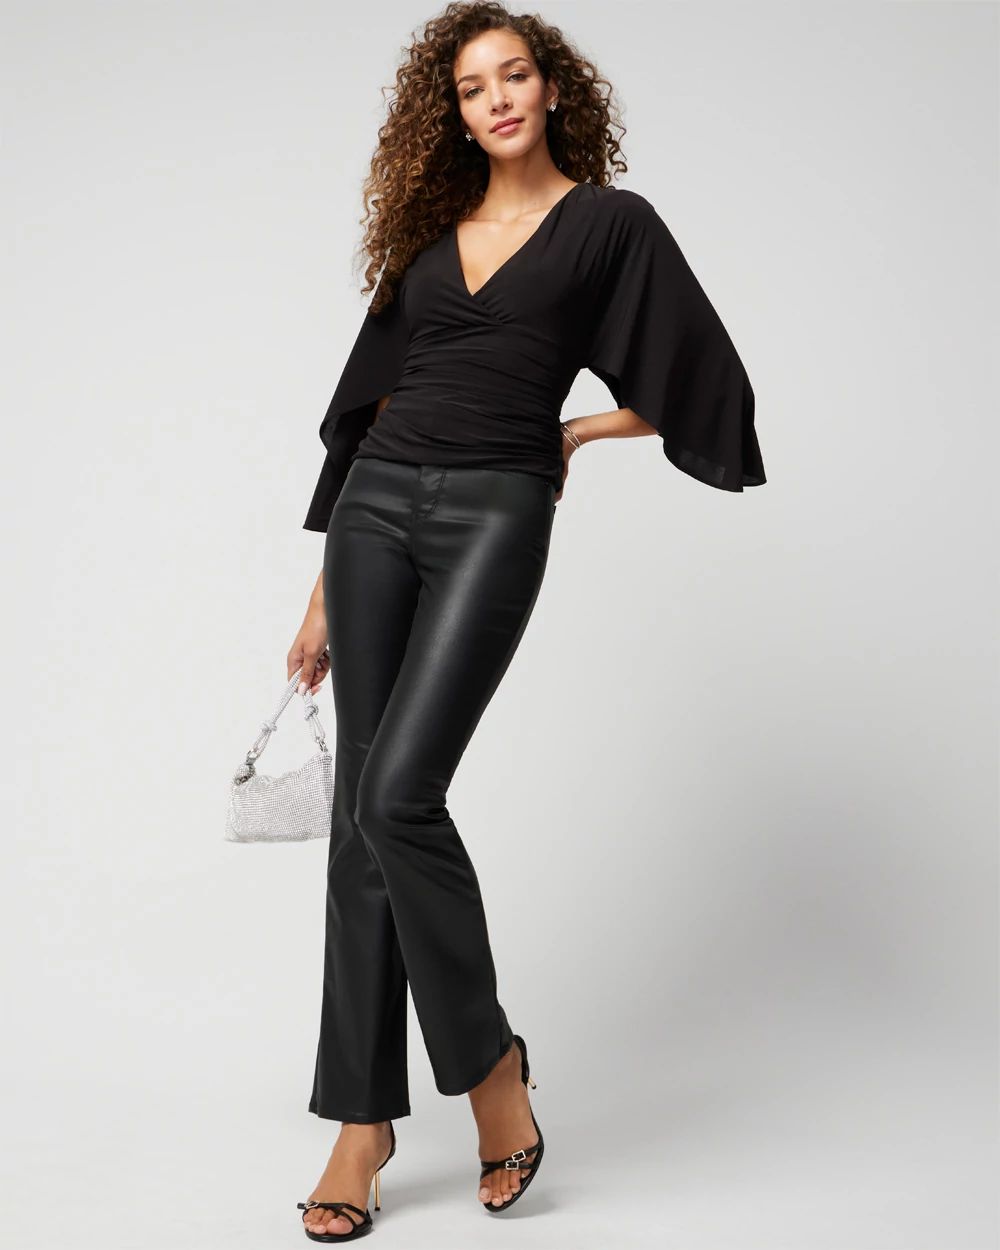 V-Neck Drape Sleeve Matte Jersey Top click to view larger image.